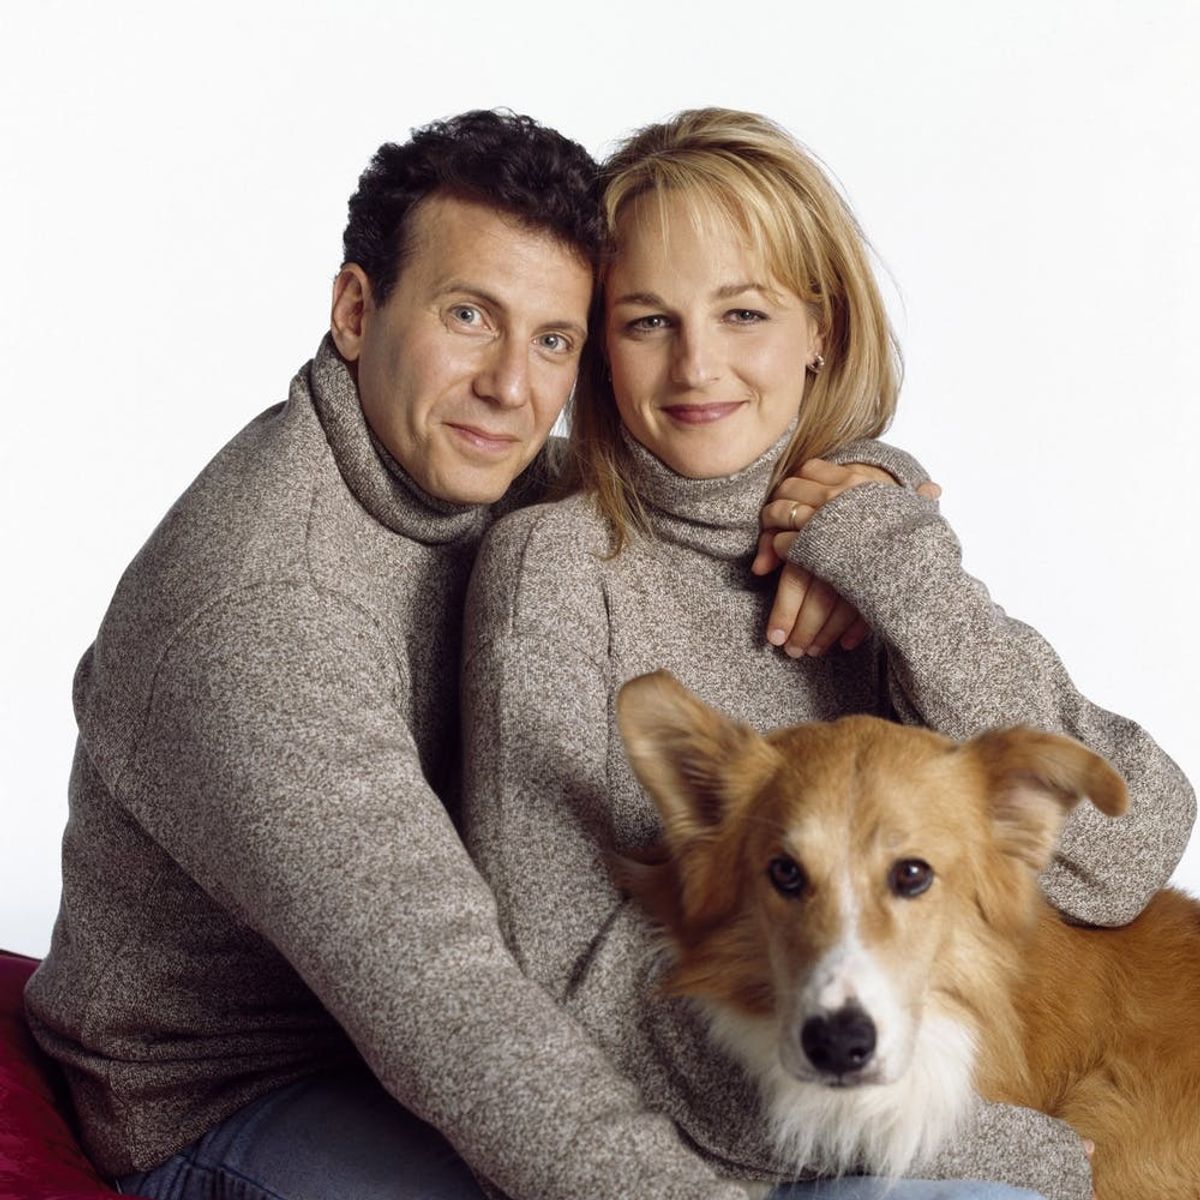 A ‘Mad About You’ Reboot With Paul Reiser and Helen Hunt Is in the Works!